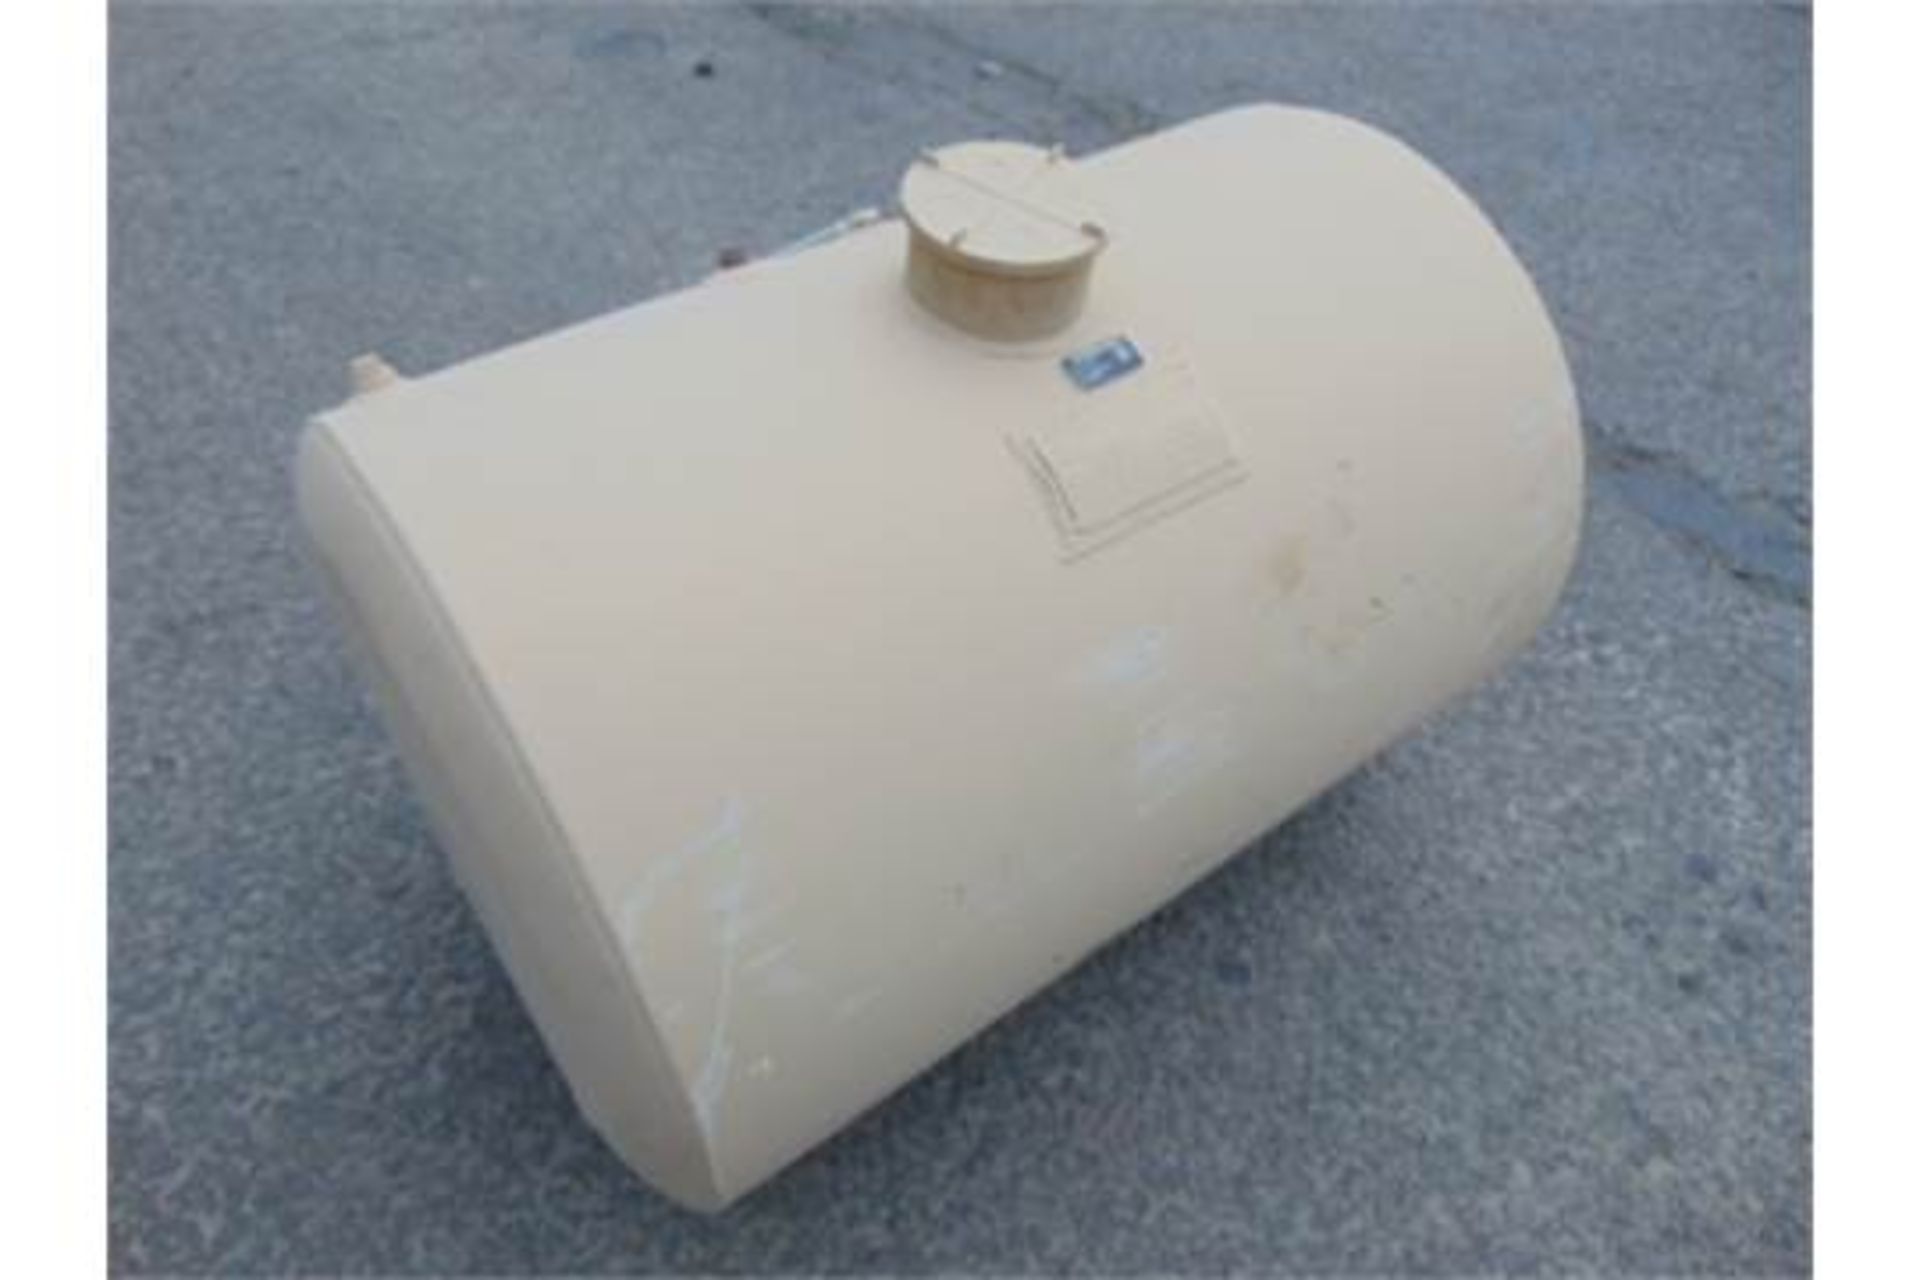 6 x Unissued Heavy Duty 51 US gall Automotive Fuel Tanks - Image 4 of 4